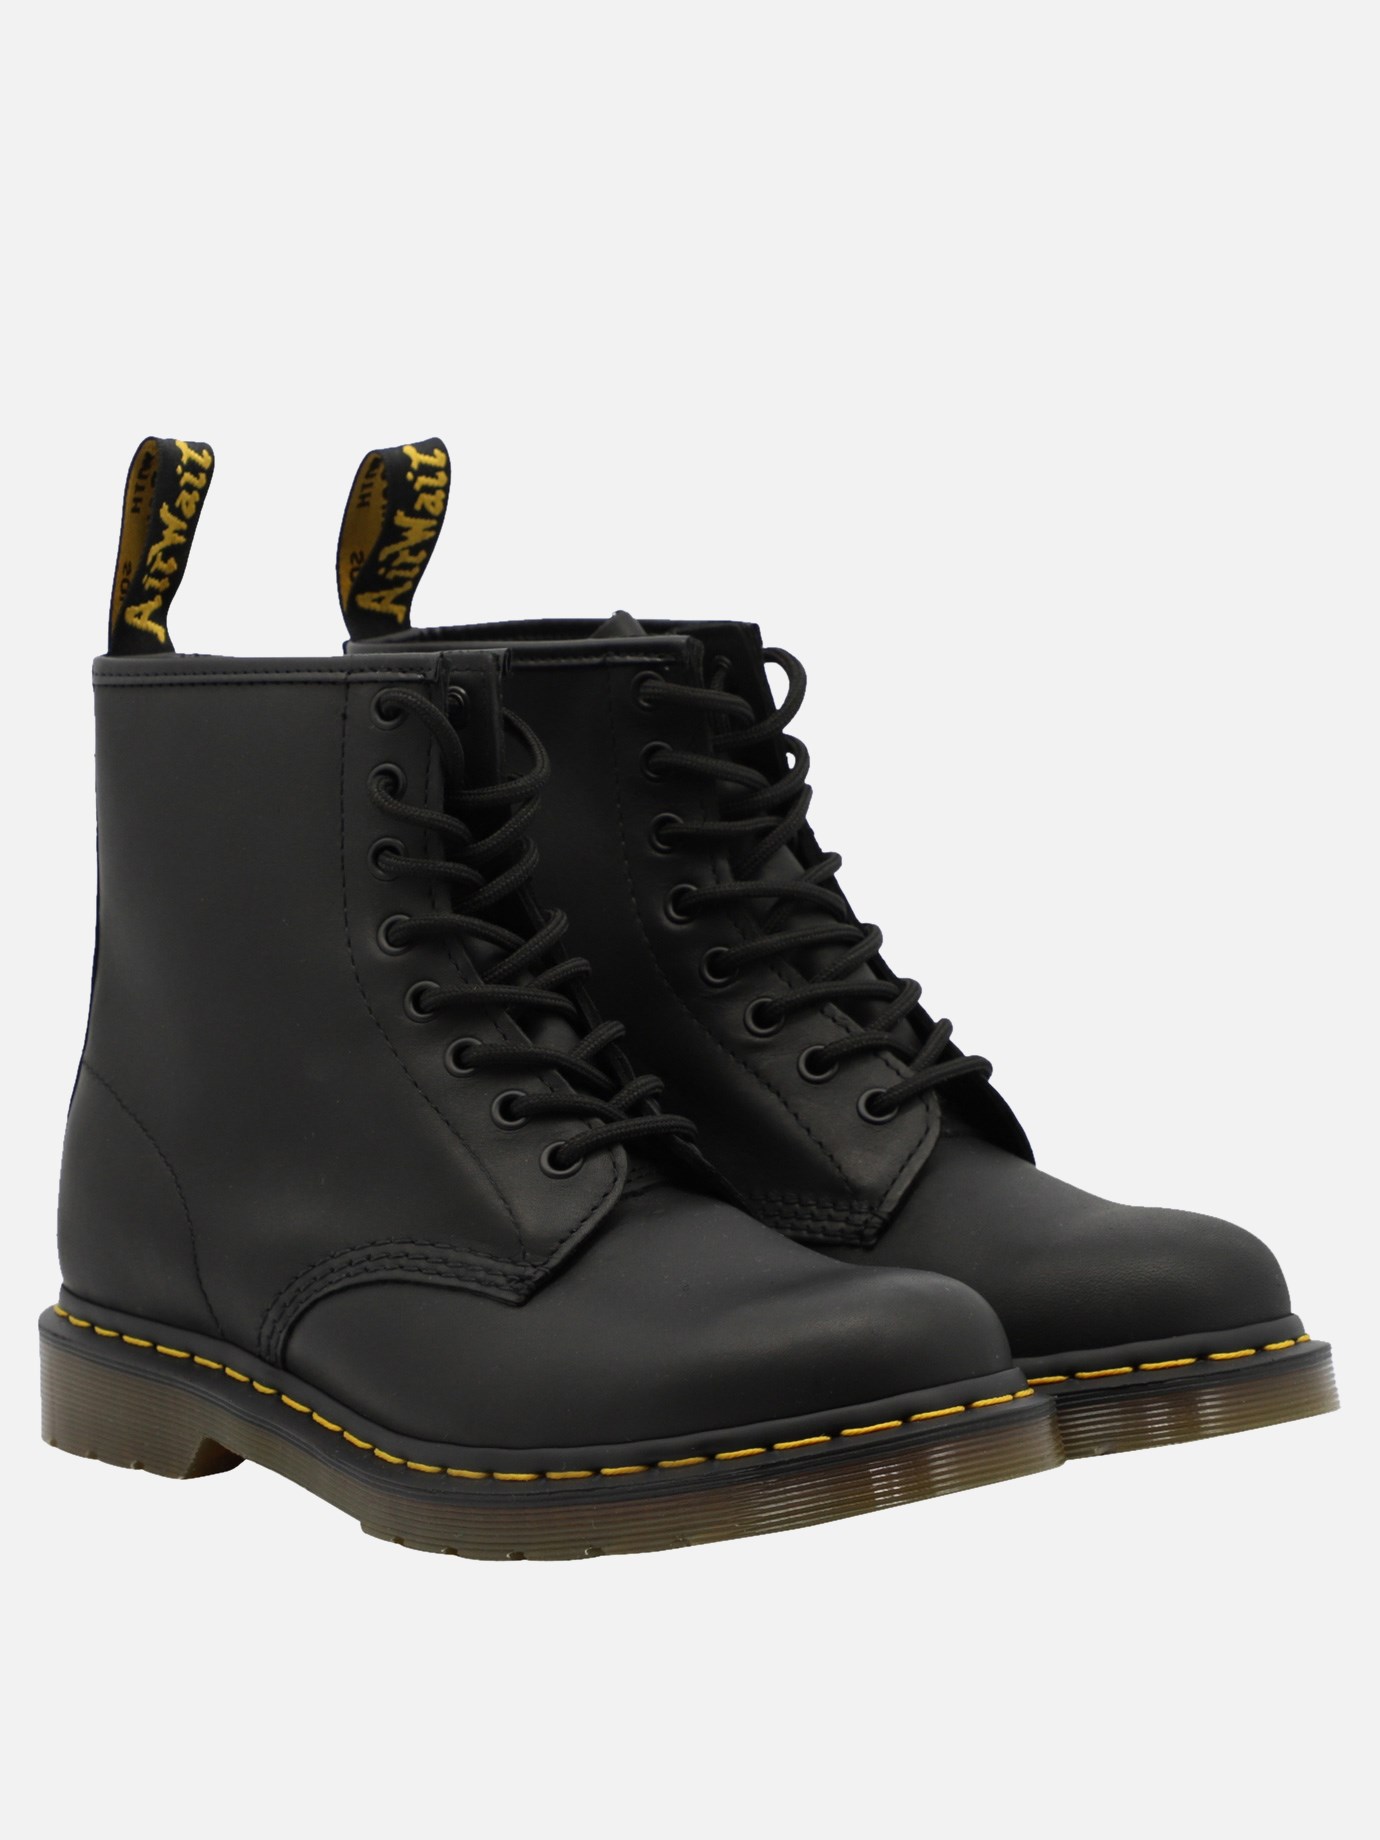  1460  military boots by Dr. Martens